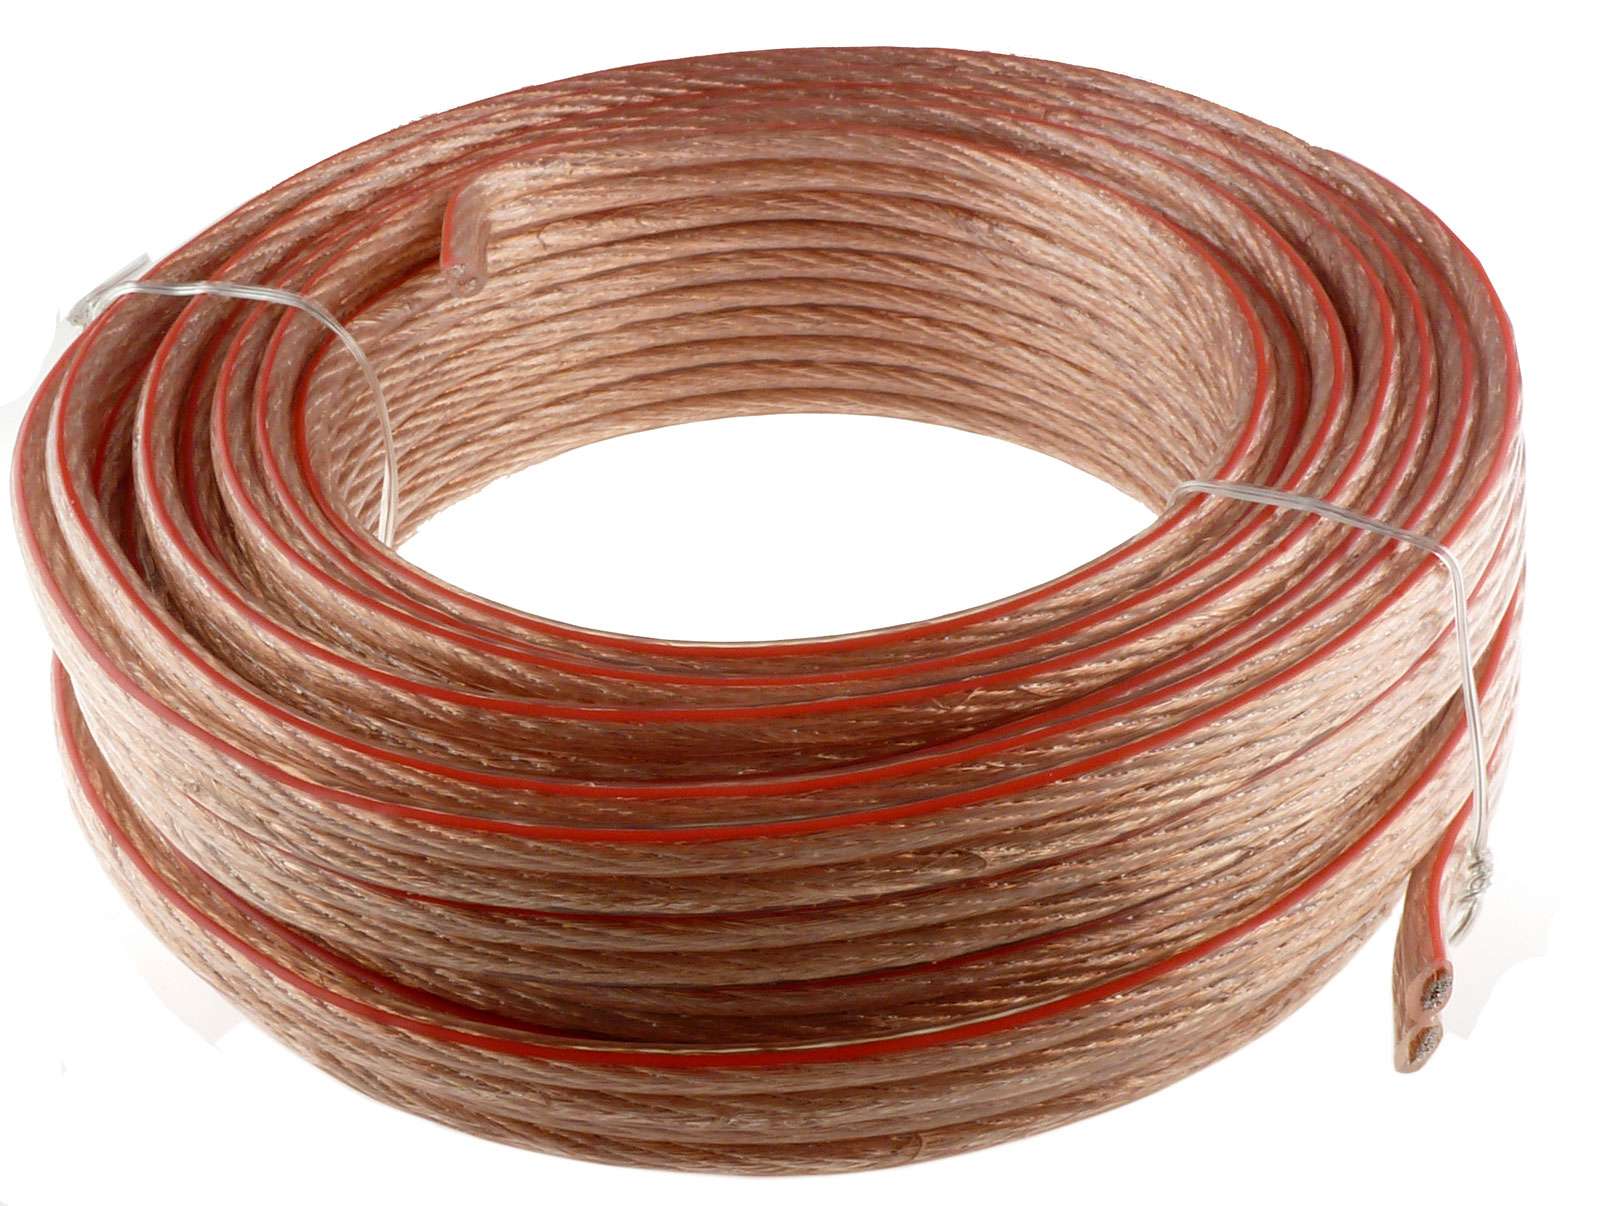 10 Gauge 50' Feet Speaker Wire for Home Car Fast Free USA Shipping 10AWG